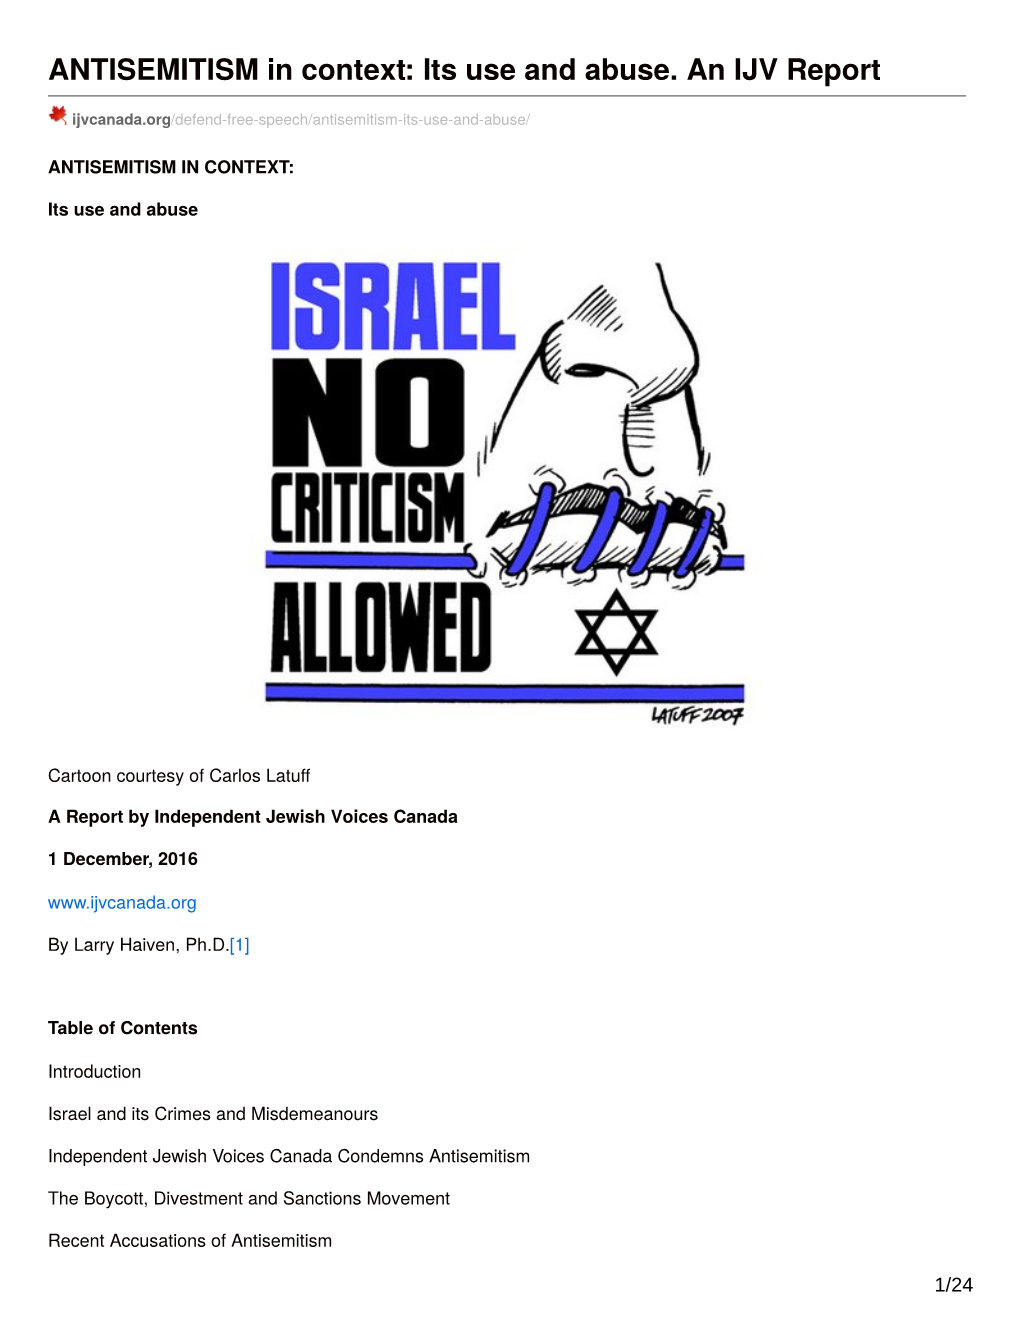 ANTISEMITISM in Context: Its Use and Abuse